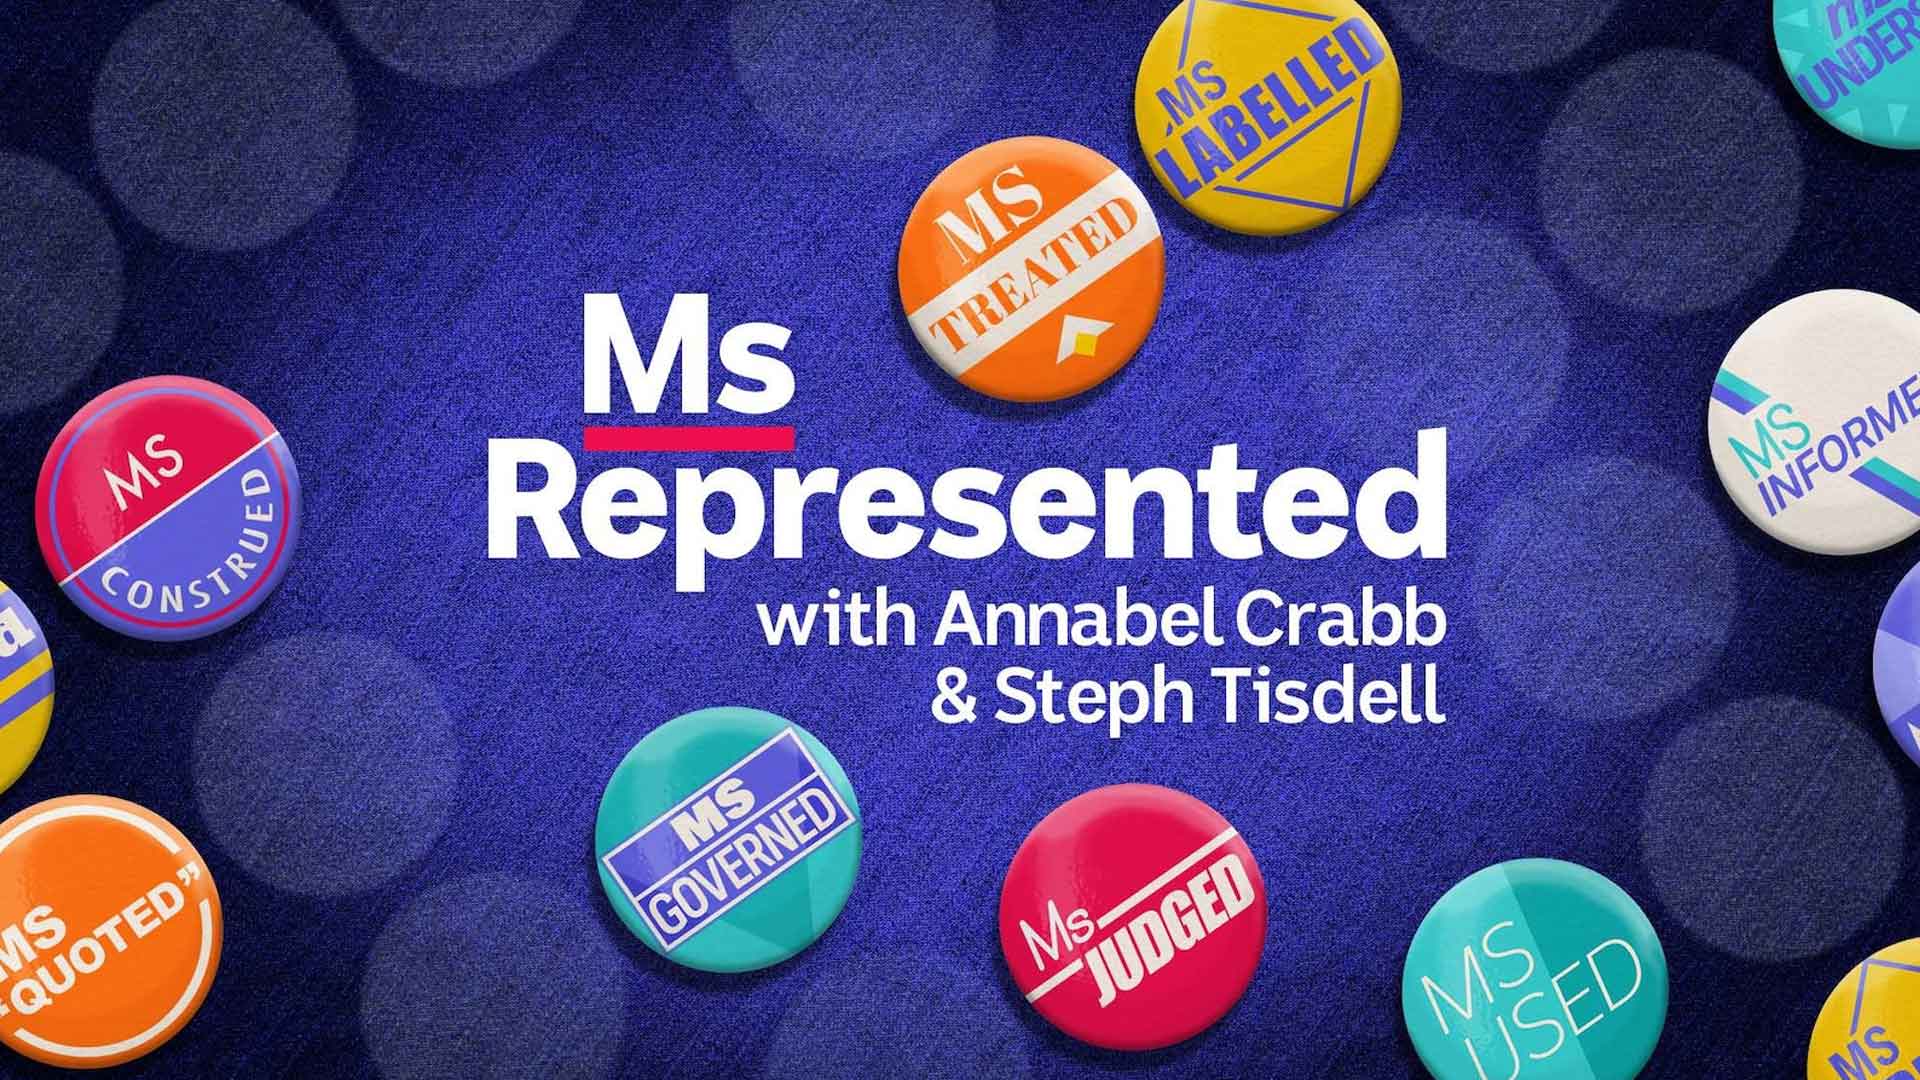 Graphic showing colourful political badges with words like "Ms governed", "Ms Construed" and "Ms Informed" on a bright purple background